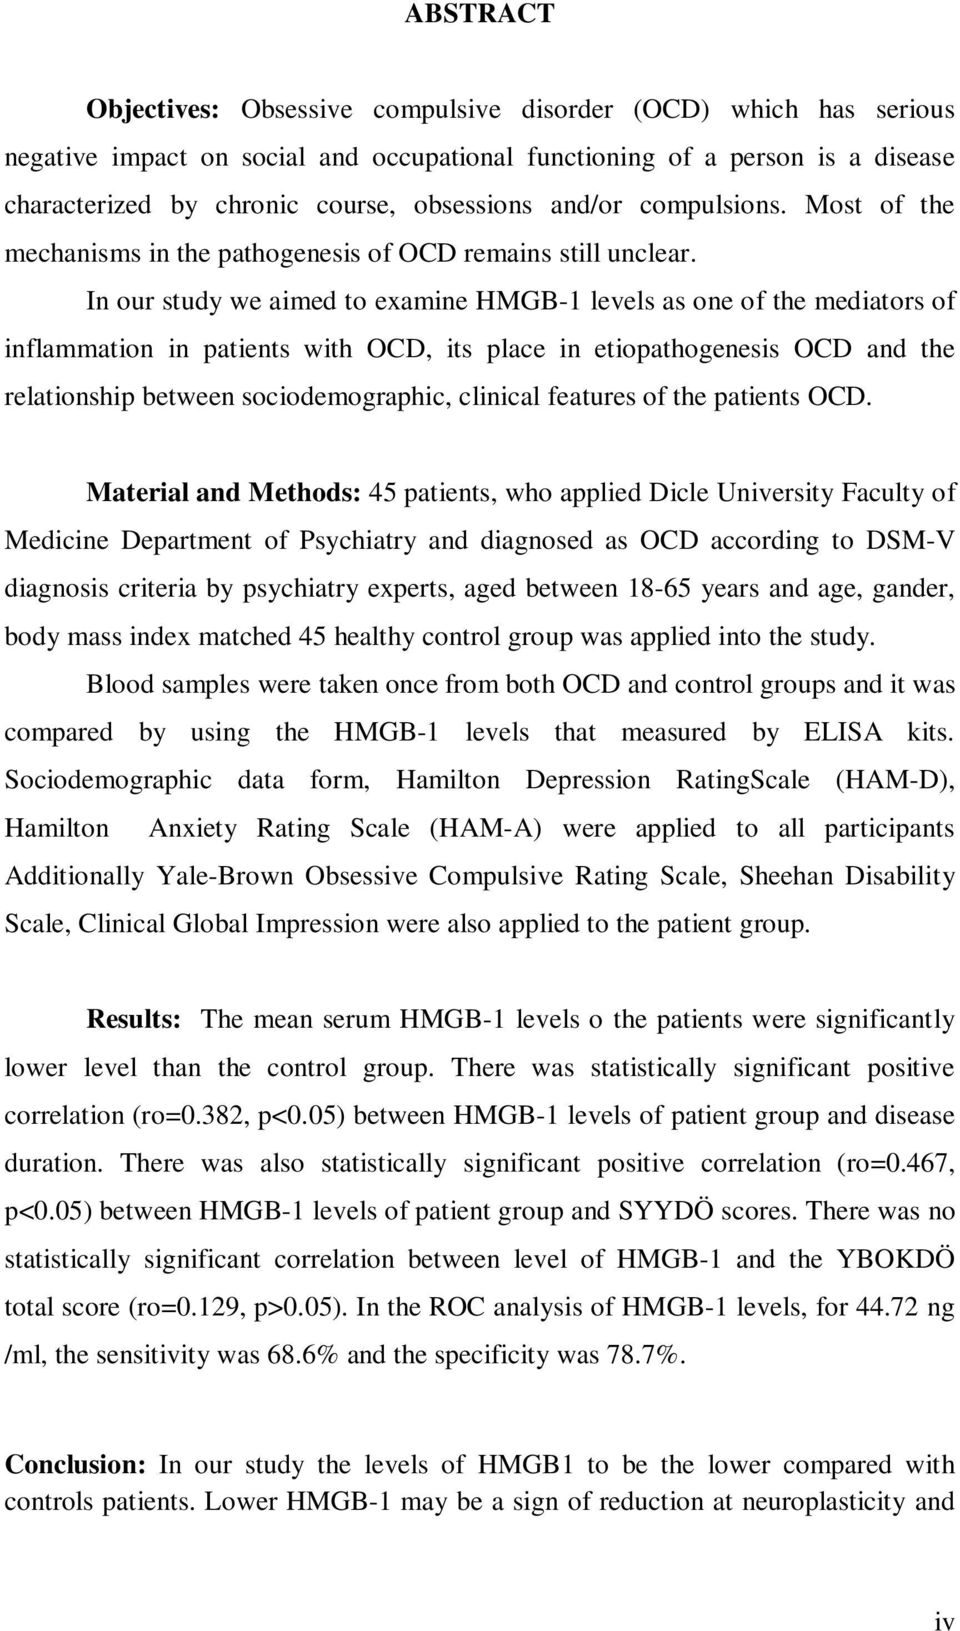 In our study we aimed to examine HMGB-1 levels as one of the mediators of inflammation in patients with OCD, its place in etiopathogenesis OCD and the relationship between sociodemographic, clinical